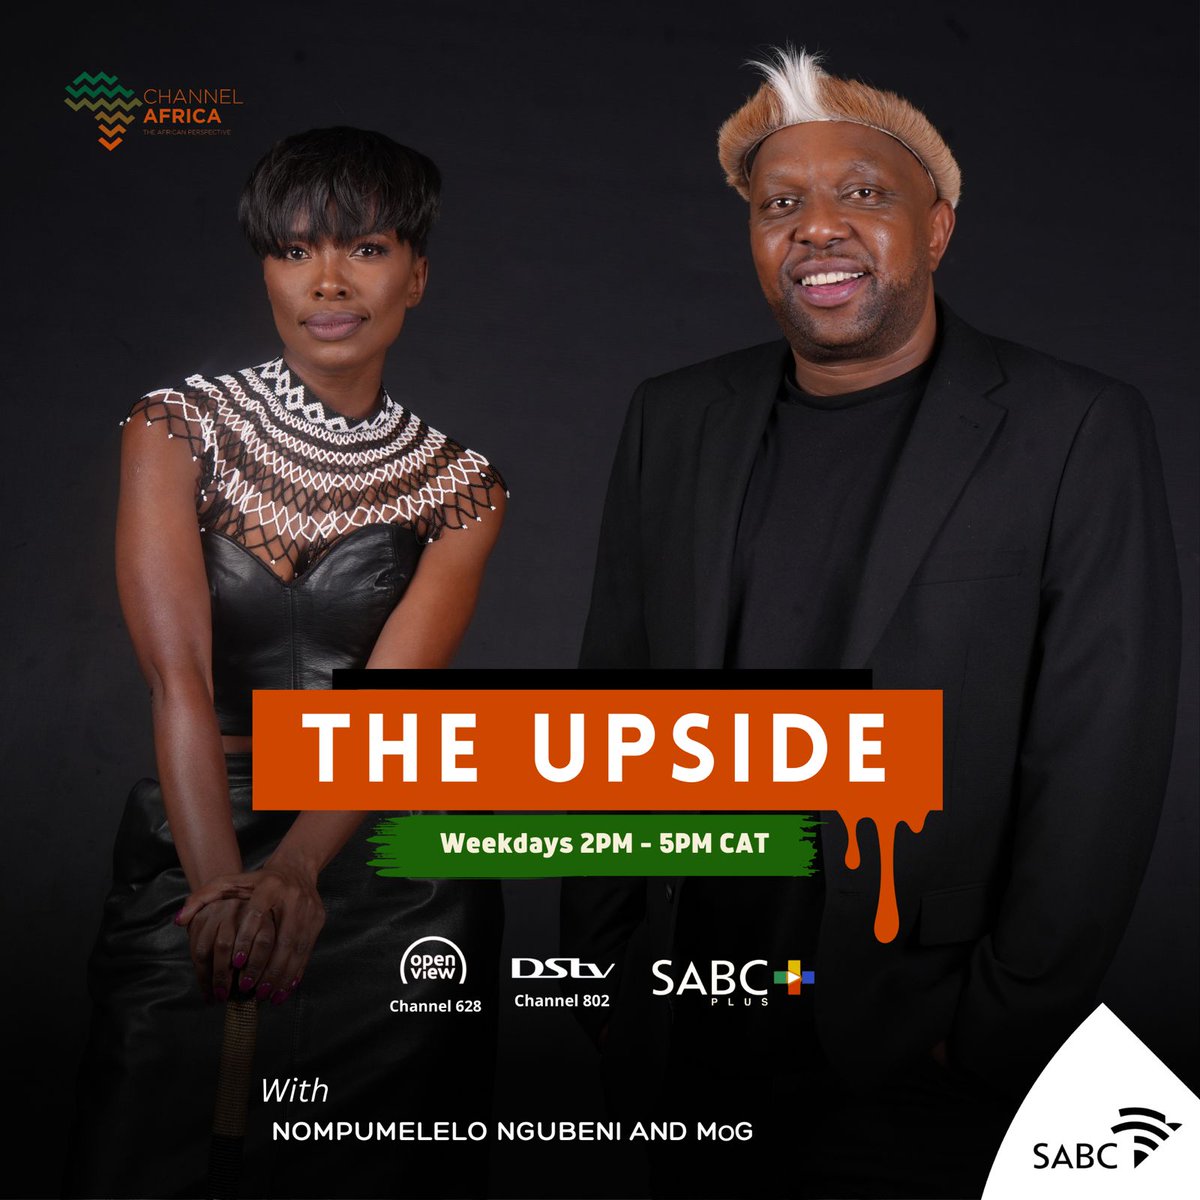 Happy International Workers Day! 

Welcome to #TheUpside with @mog_moments & @MpumiNgubeni.

Tune in: @SABCPlus app | DSTV 802| Open View 628

Stream: bit.ly/Listen2Channel…

#ChannelAfrica